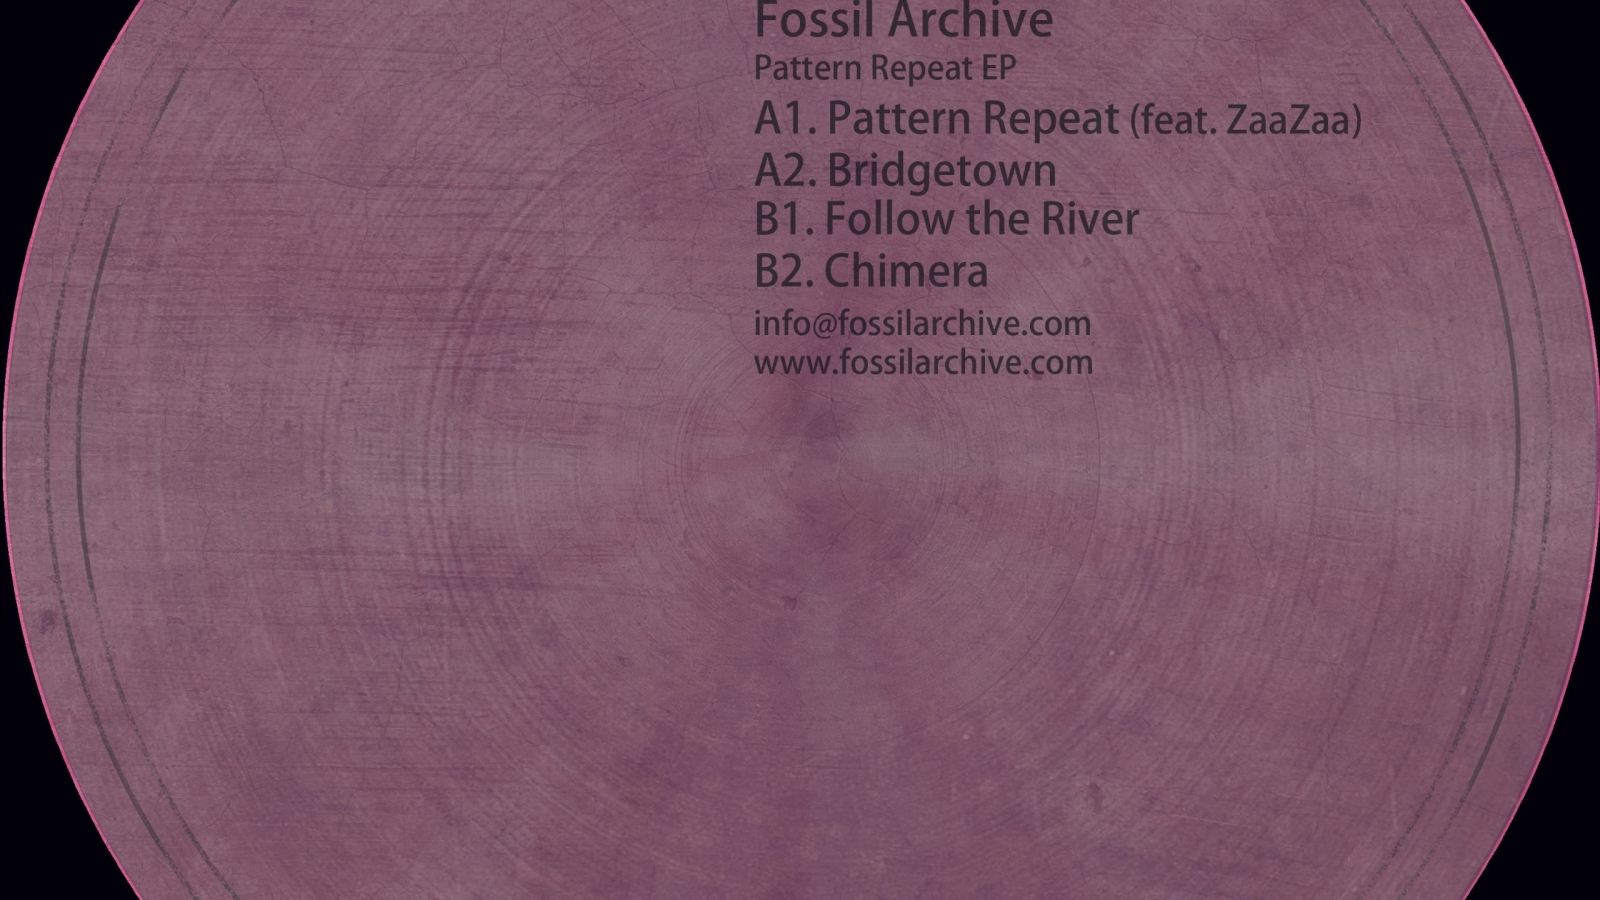 PACK SHOT - Fossil Archive - Pattern Repeat EP - Fossil Archive